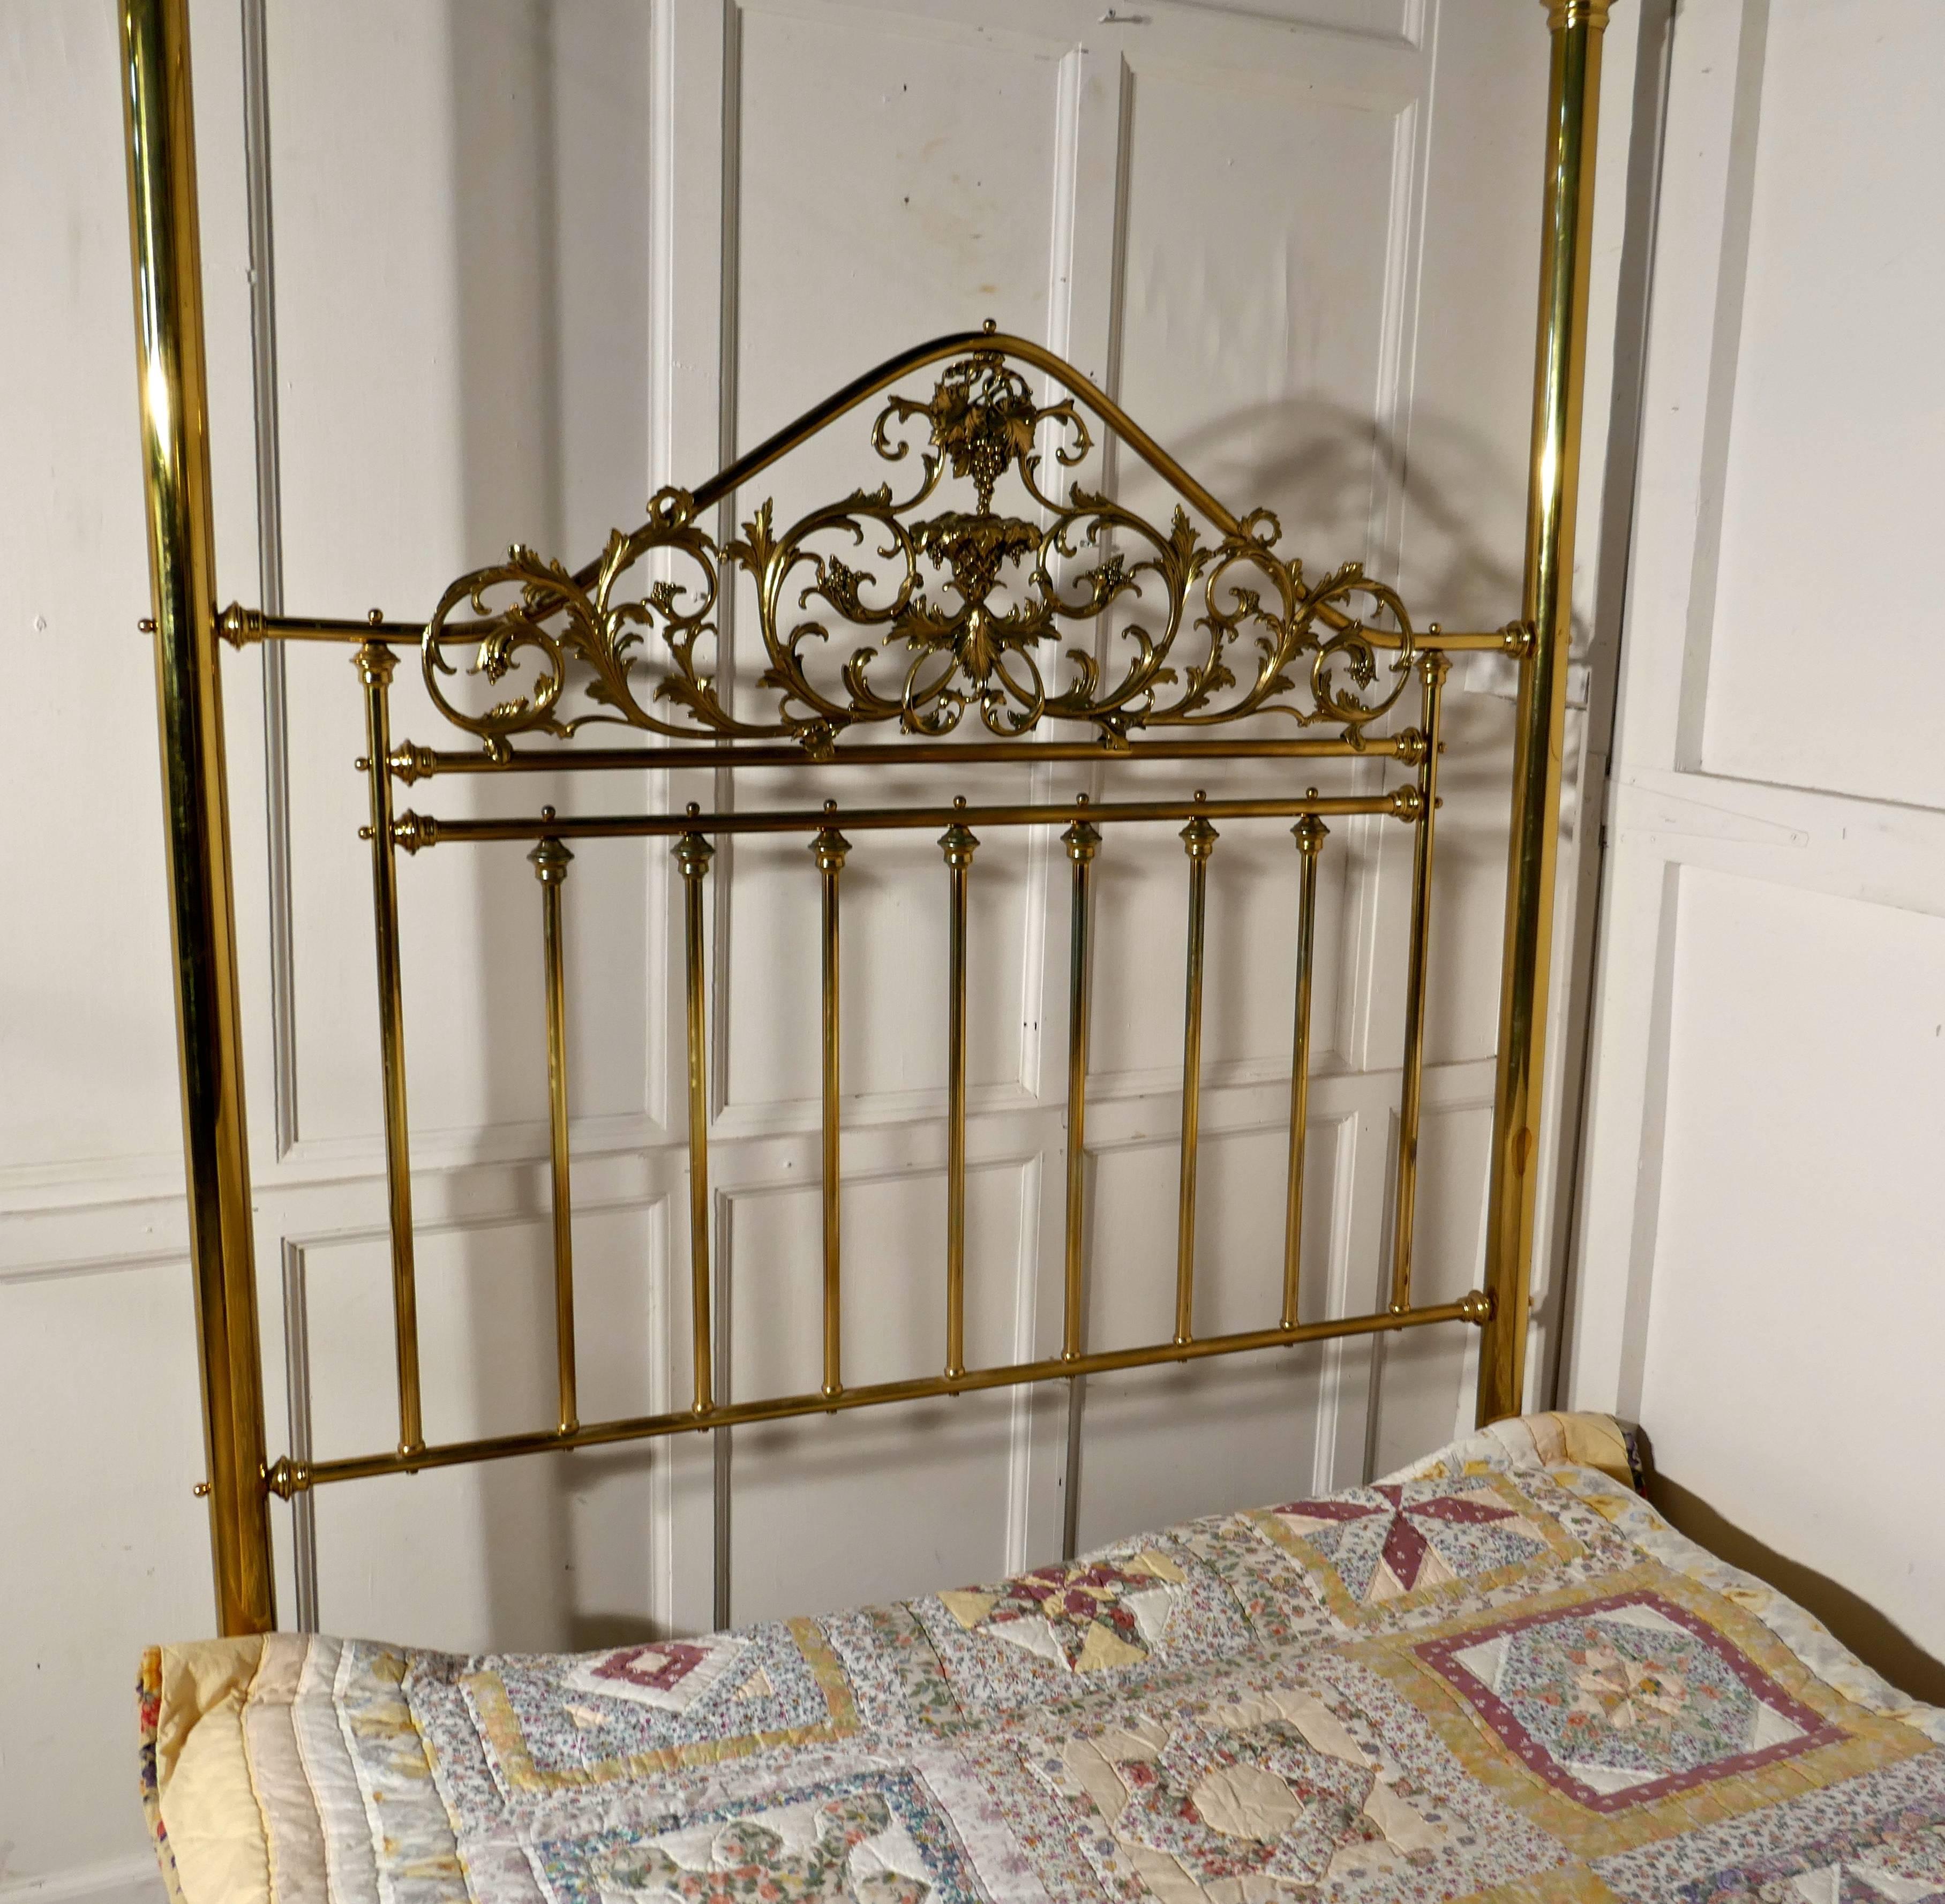 This very pretty Victorian bed it dates, circa 1880 it is has a charming brass head board, the Art Nouveau central panel is decorated with grapes and vines all made and cast in solid brass, on either side of this there are tall posts at each side